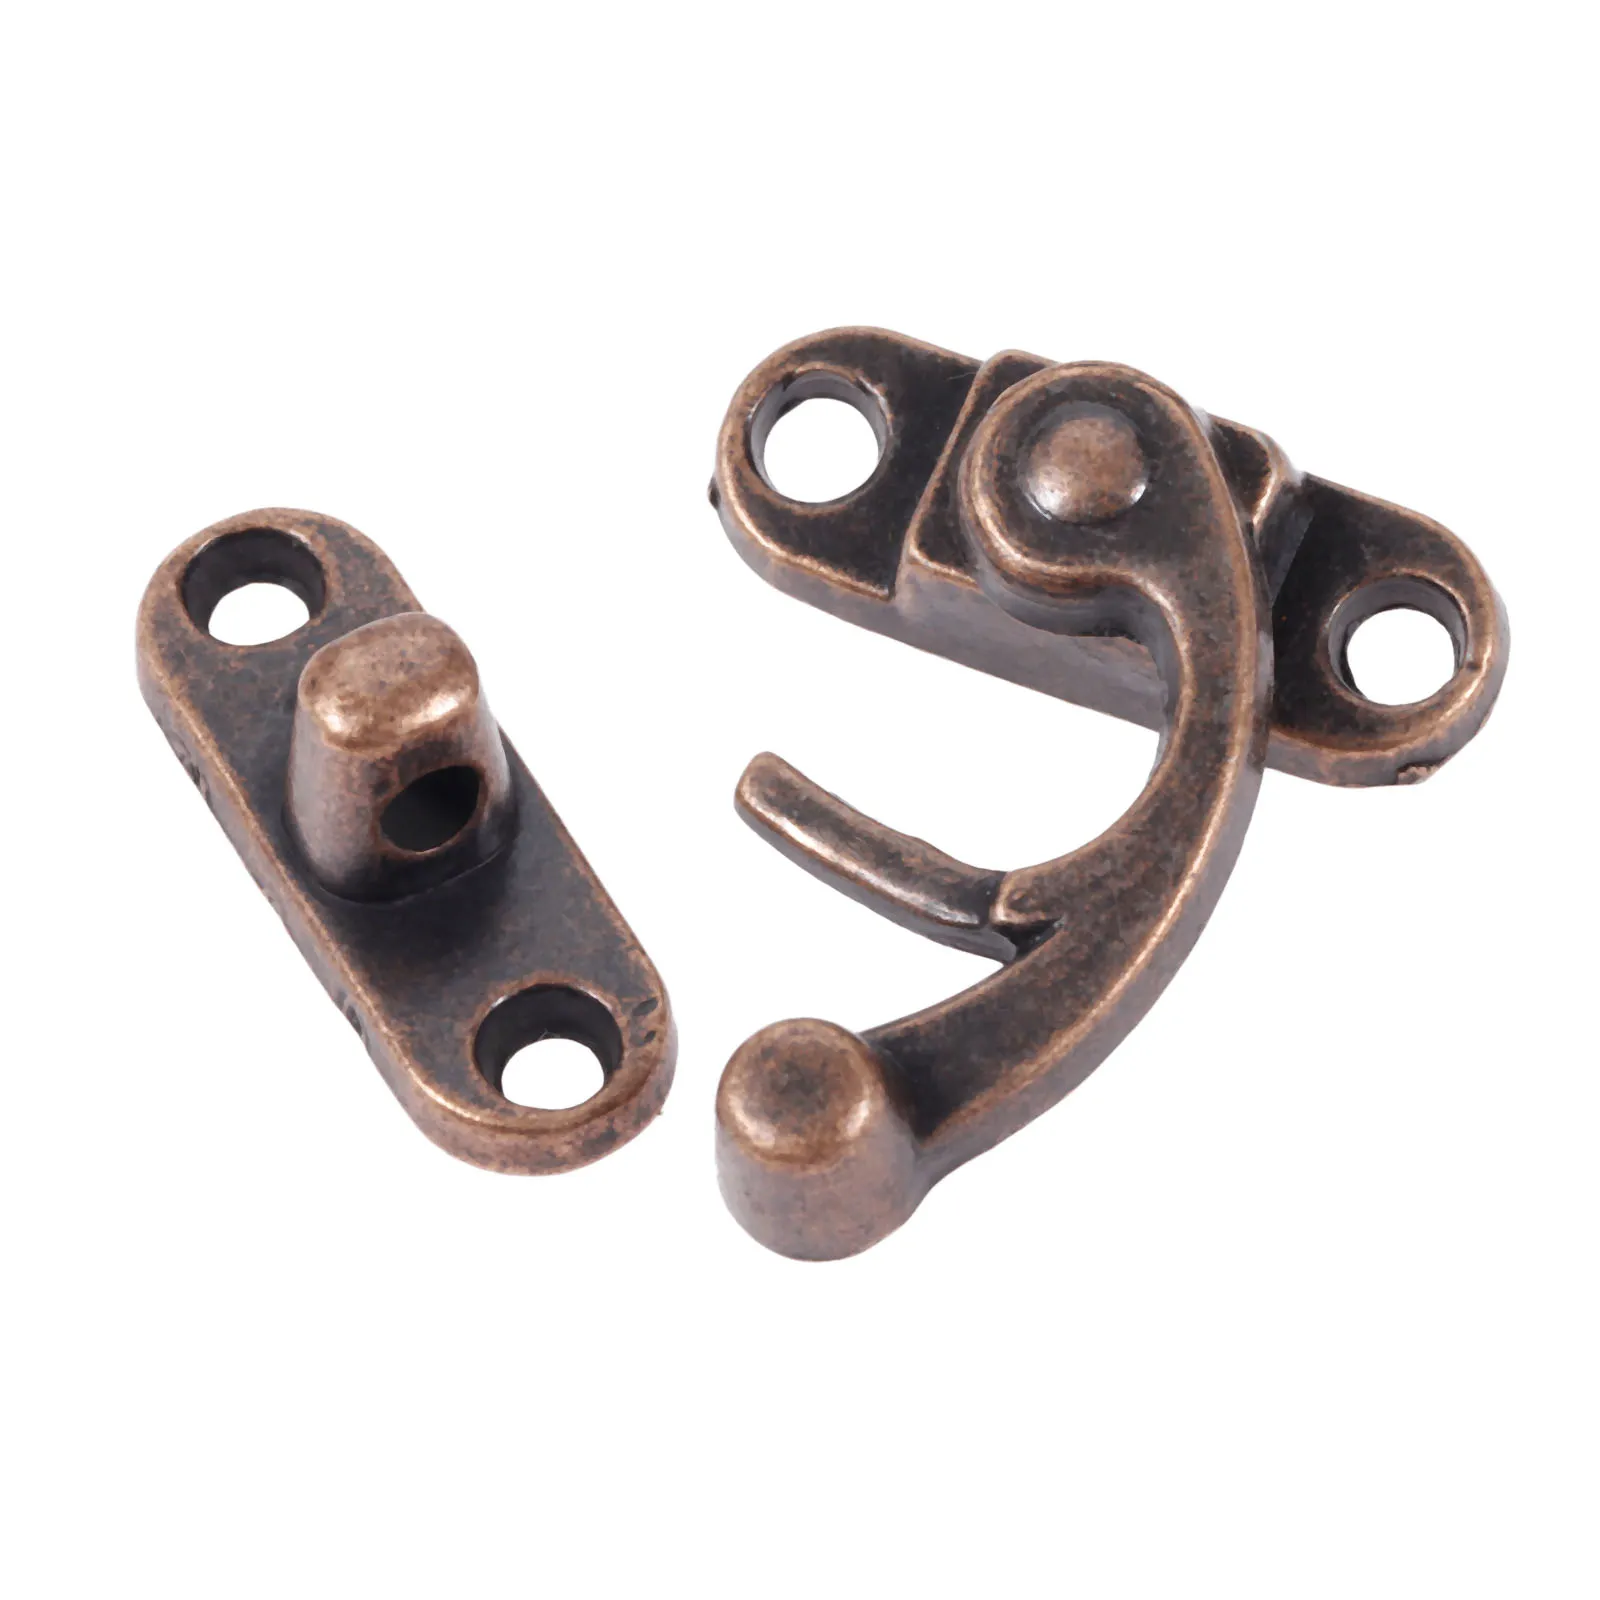 2sets Box Latch Hasps with screws Antique Padlocks Silver/Red Copper Buckle lock 29*33mm Jewelry Wooden Box Wine Case hardware